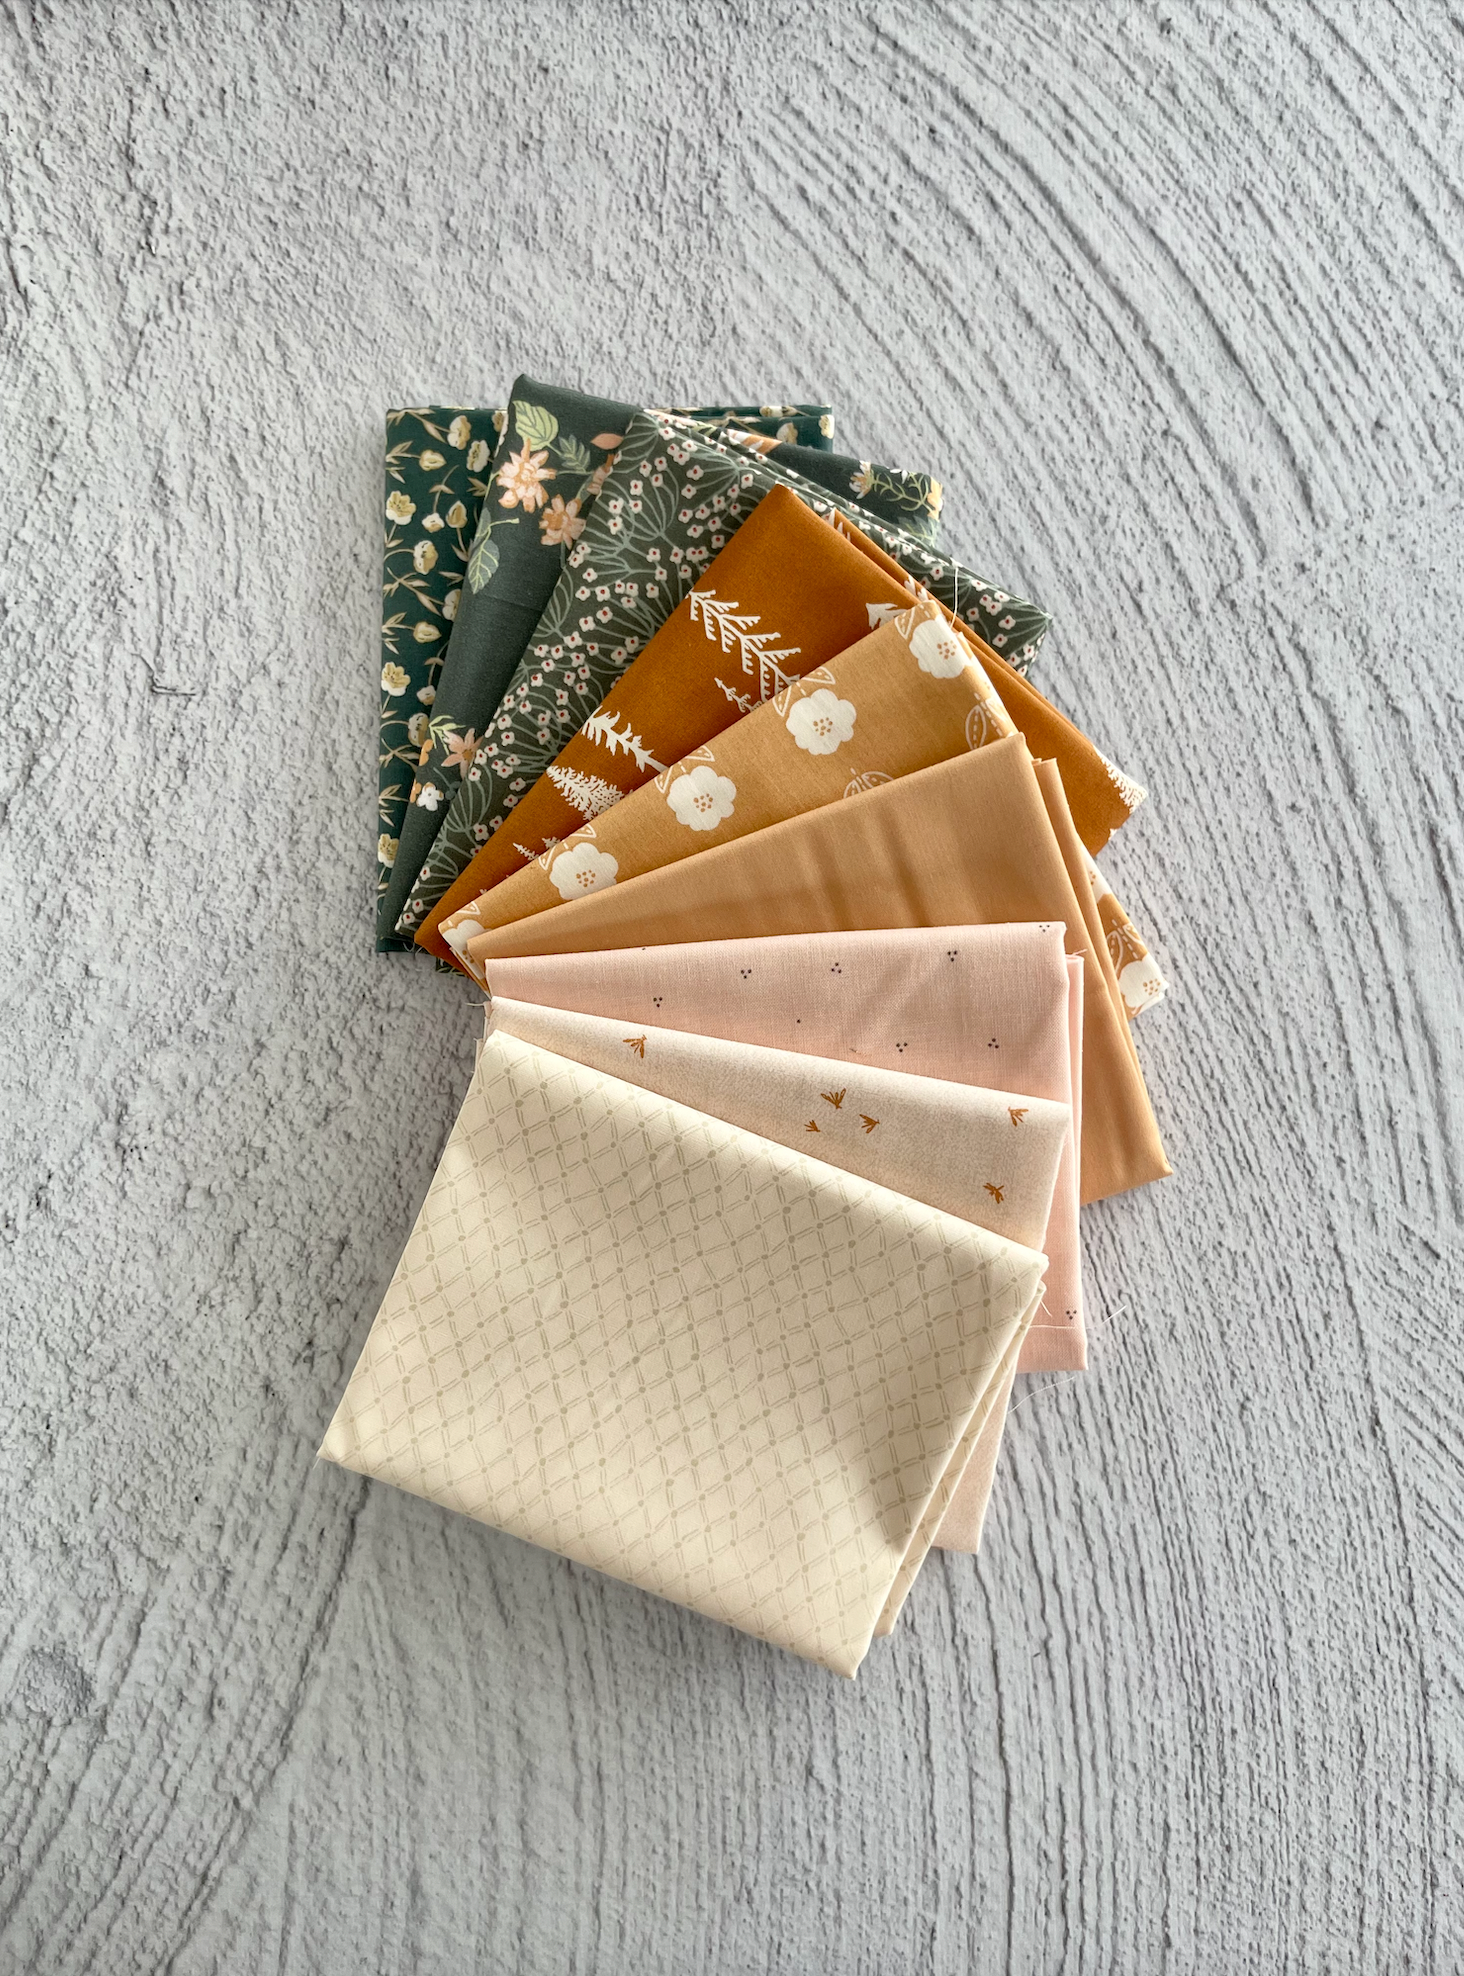 The Heiresses Daughter - Curated 4, 9, 12, 16, 20, 25 or 30 Fat Quarter Bundle